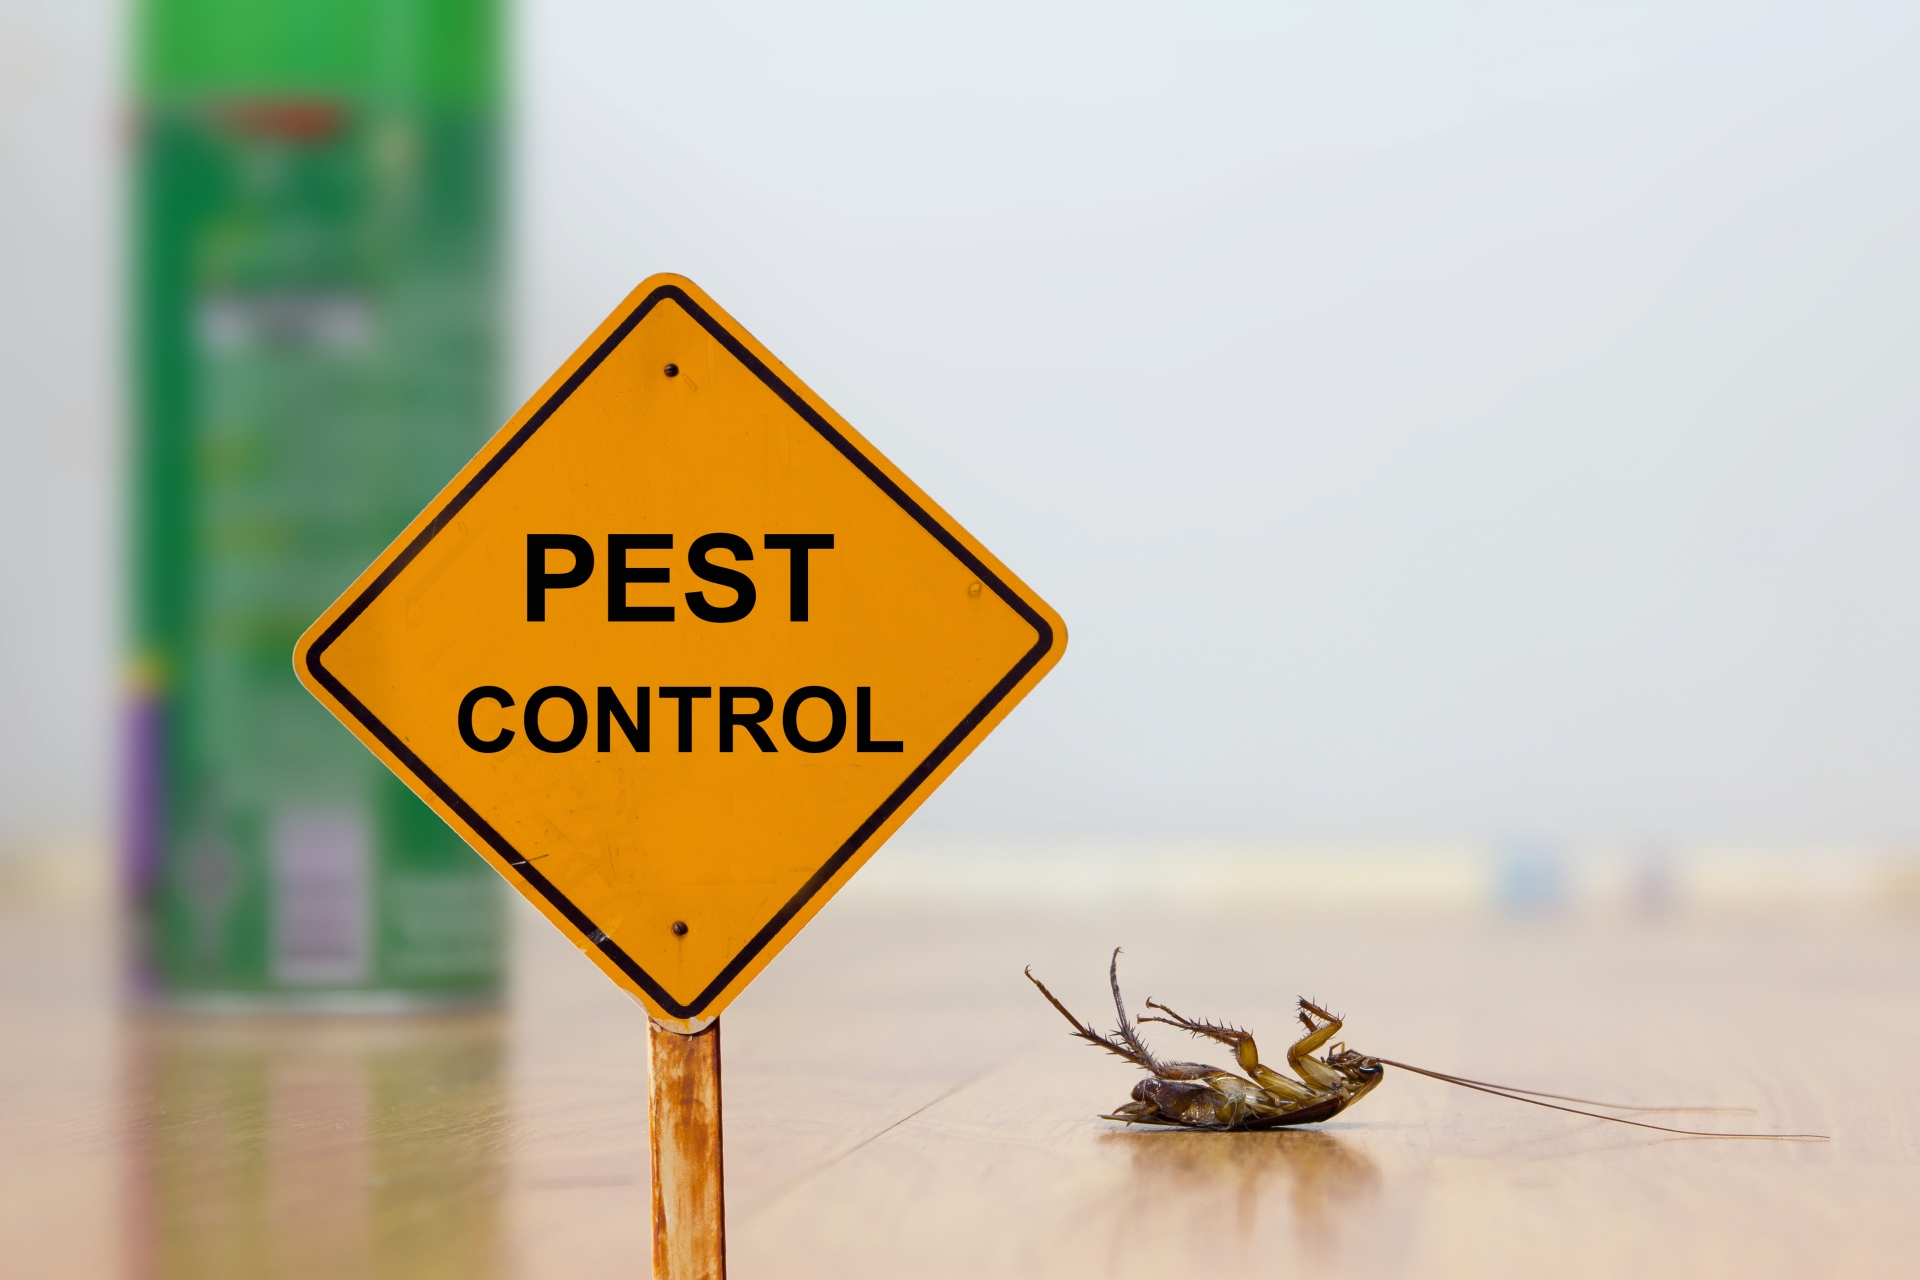 24 Hour Pest Control, Pest Control in Tulse Hill, West Norwood, SE27. Call Now 020 8166 9746